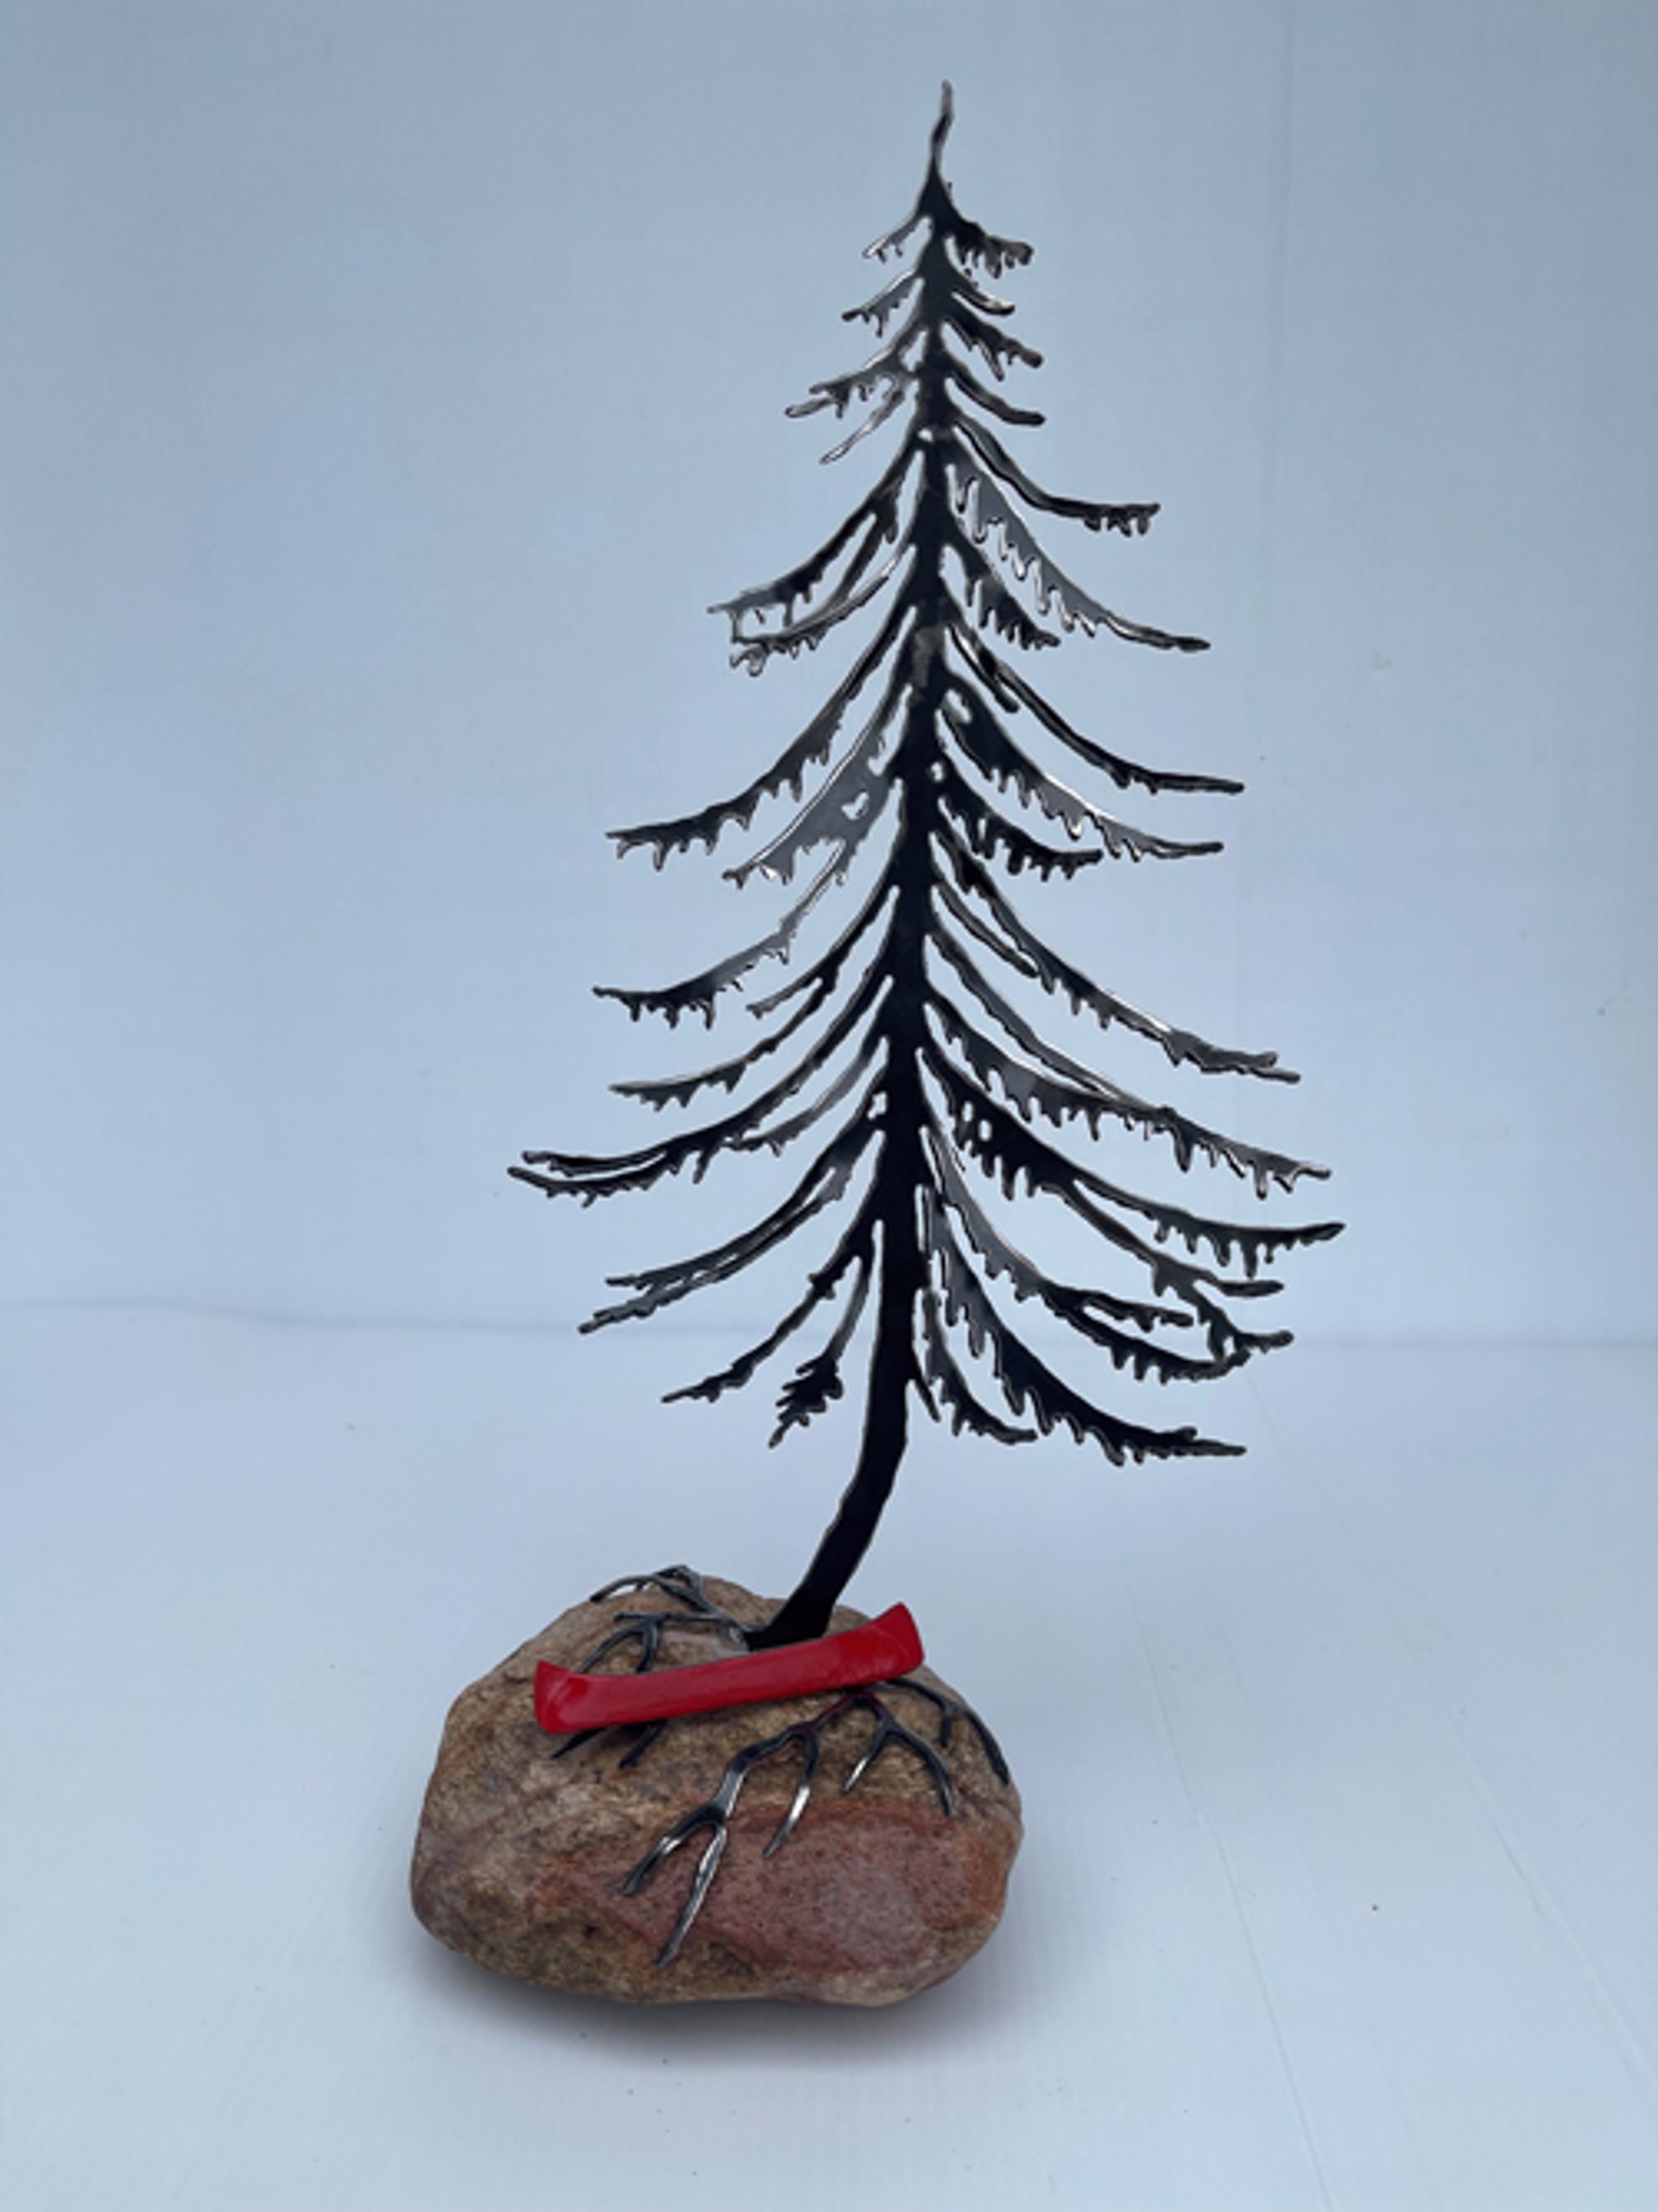 Jack Pine with Red Canoe on Rock by Cathy Mark